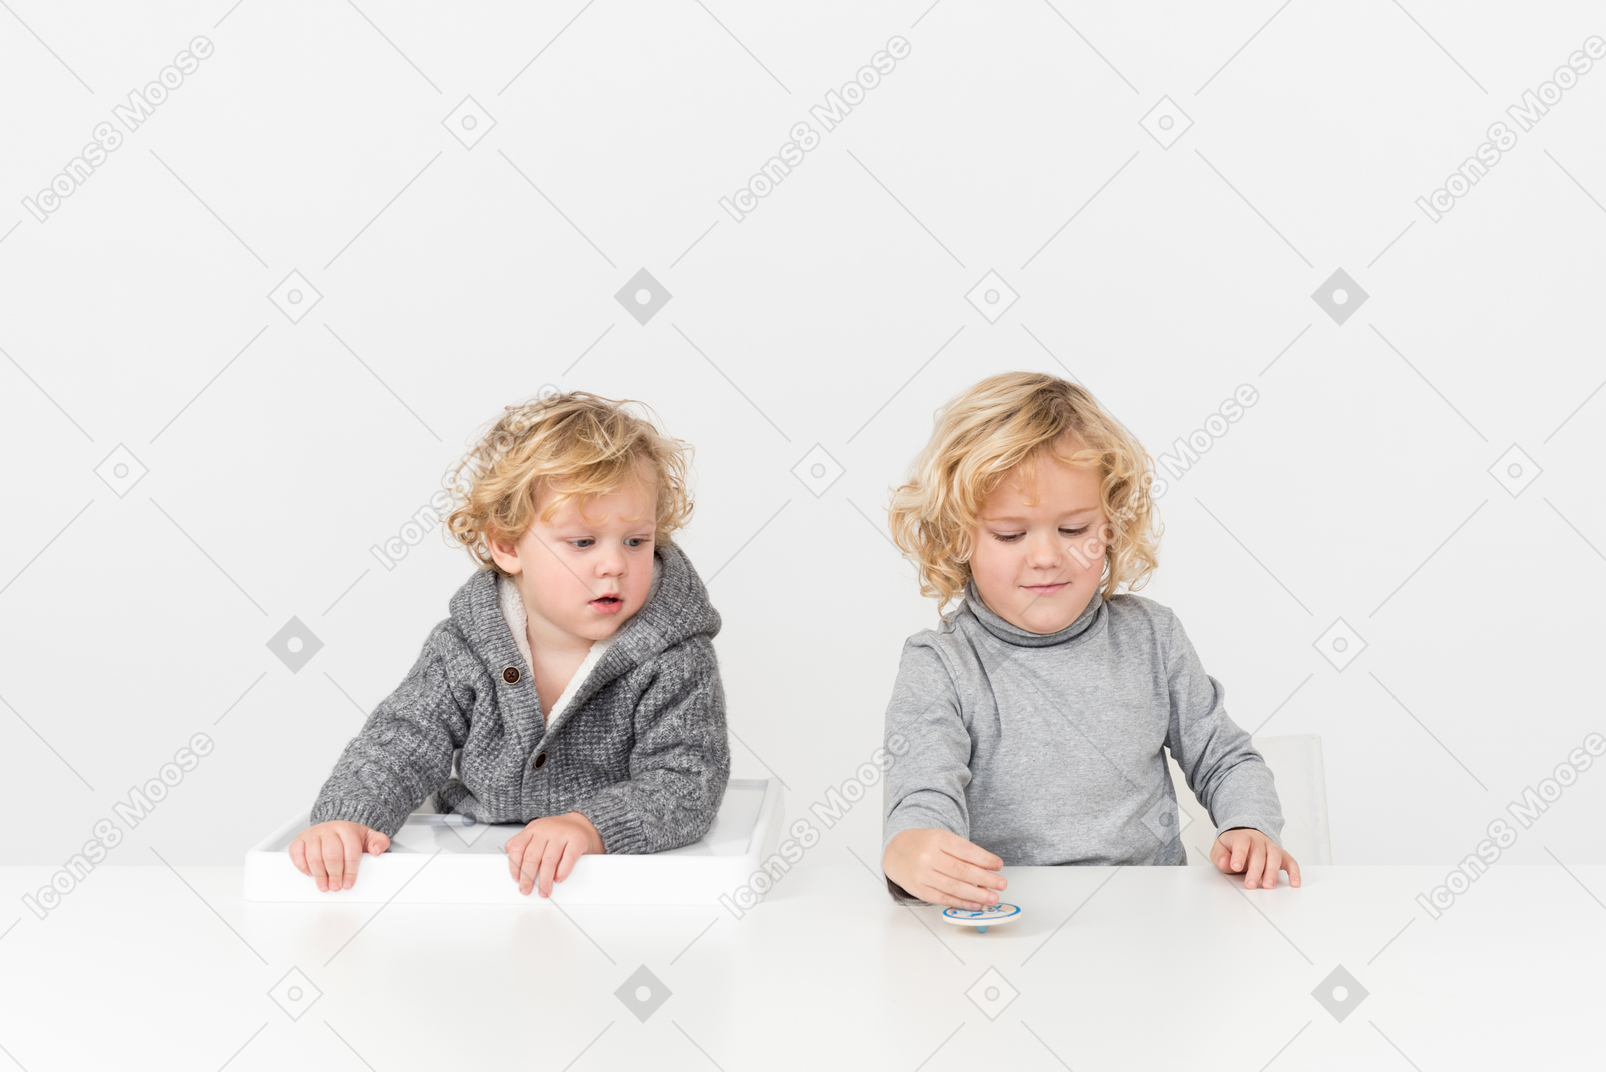 Boy playing with spinning top next to his brother